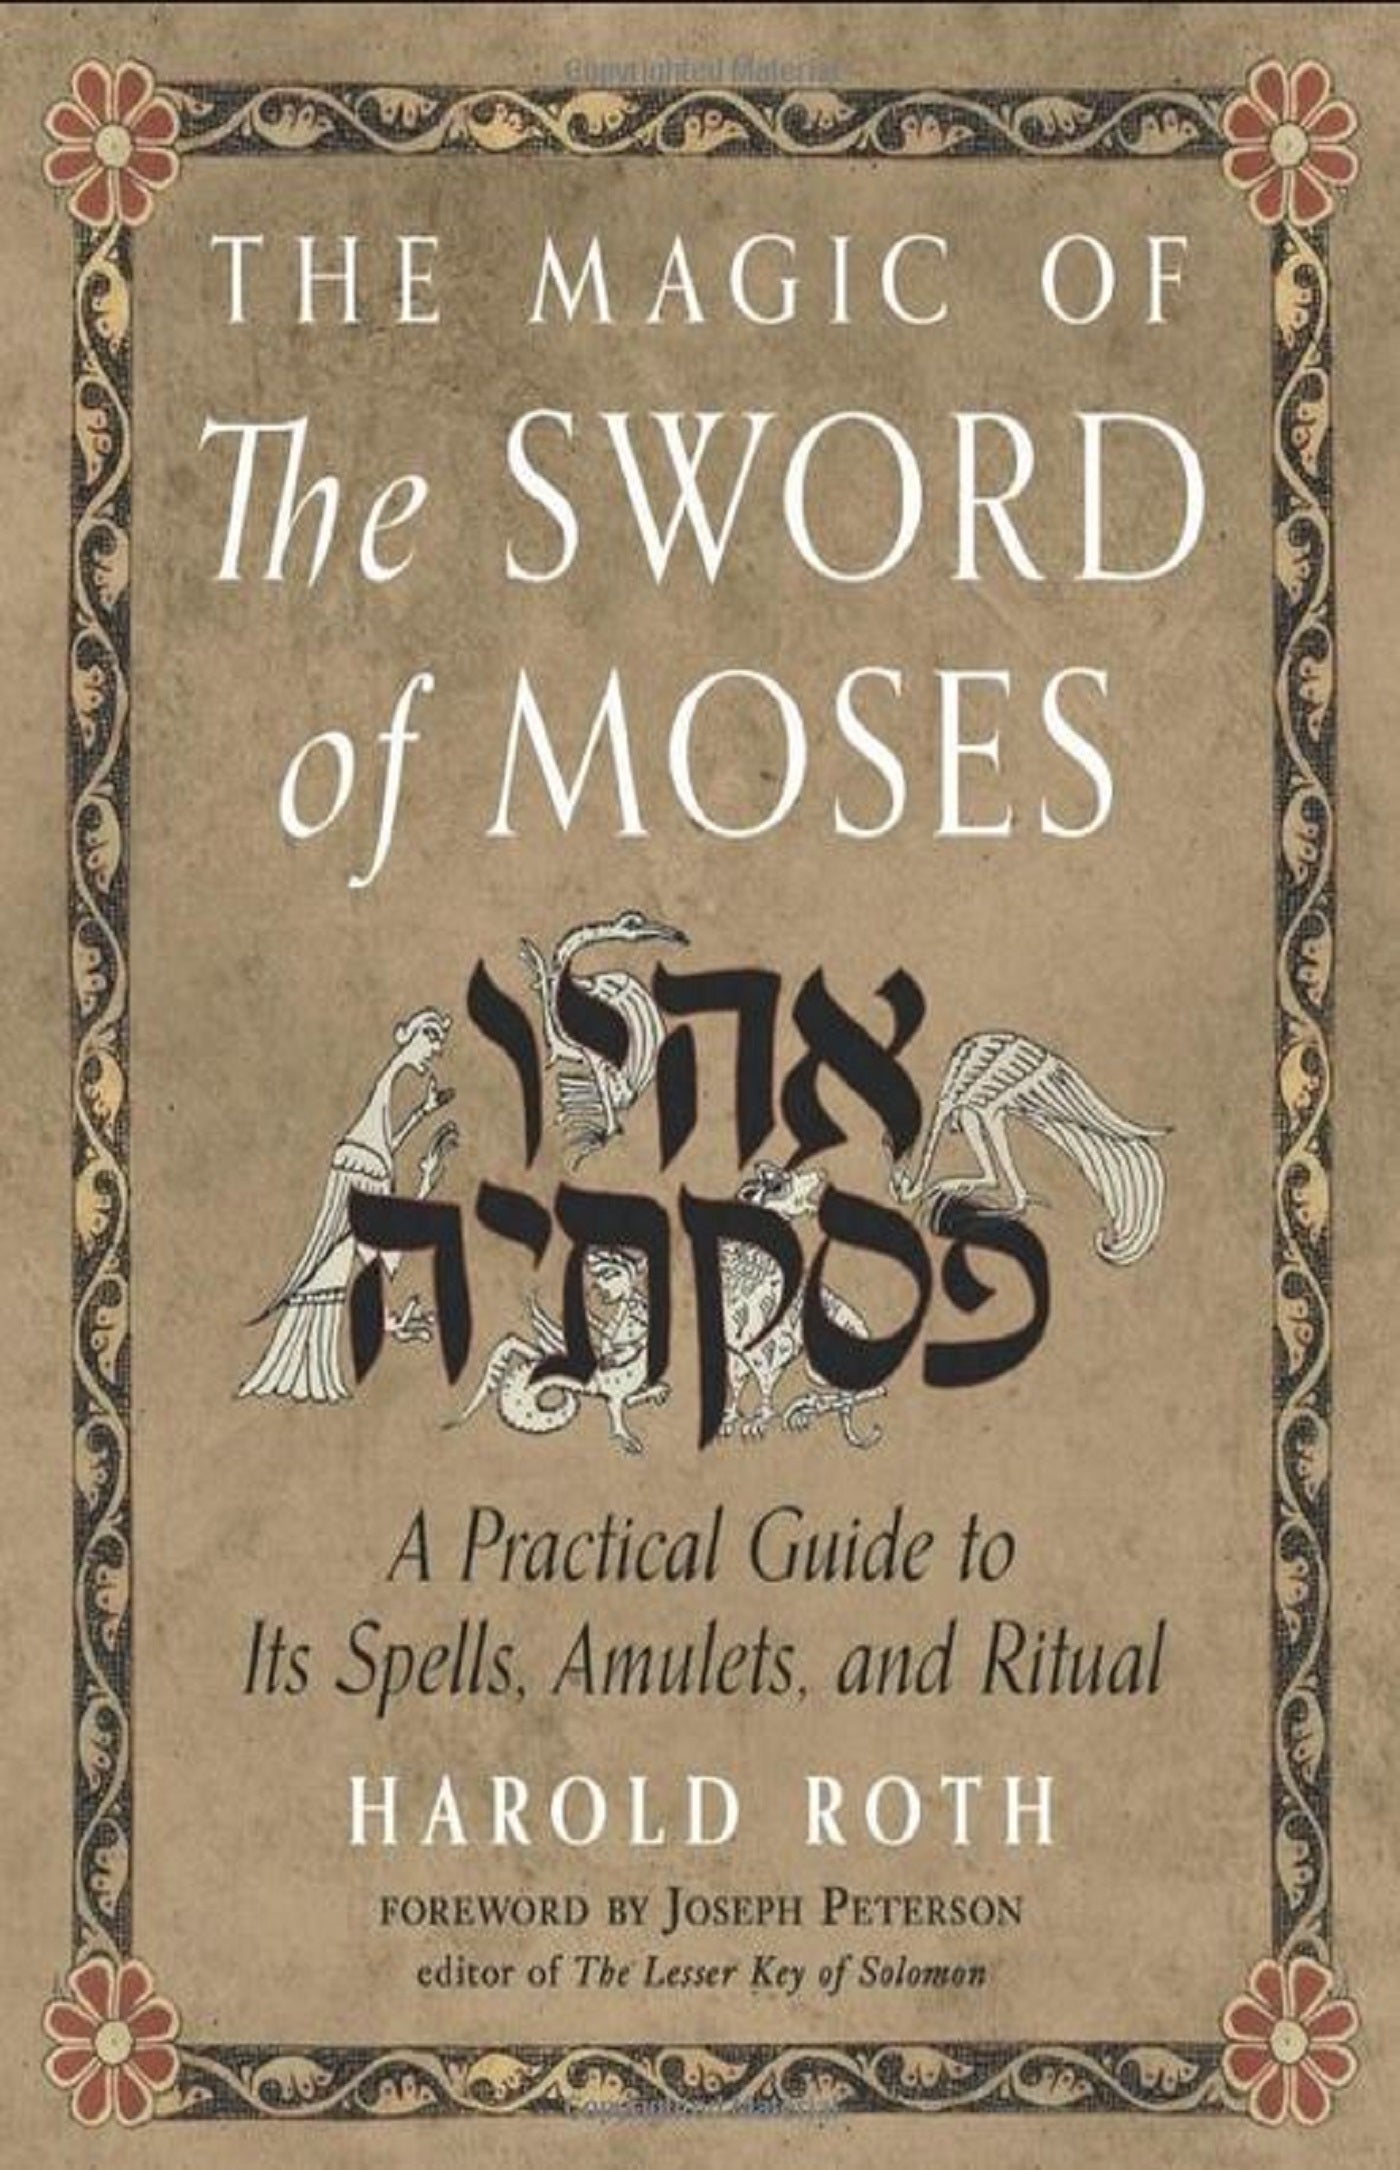 The Magic of the Sword of Moses; A Practical Guide to Its Spells, Amulets, and Ritual